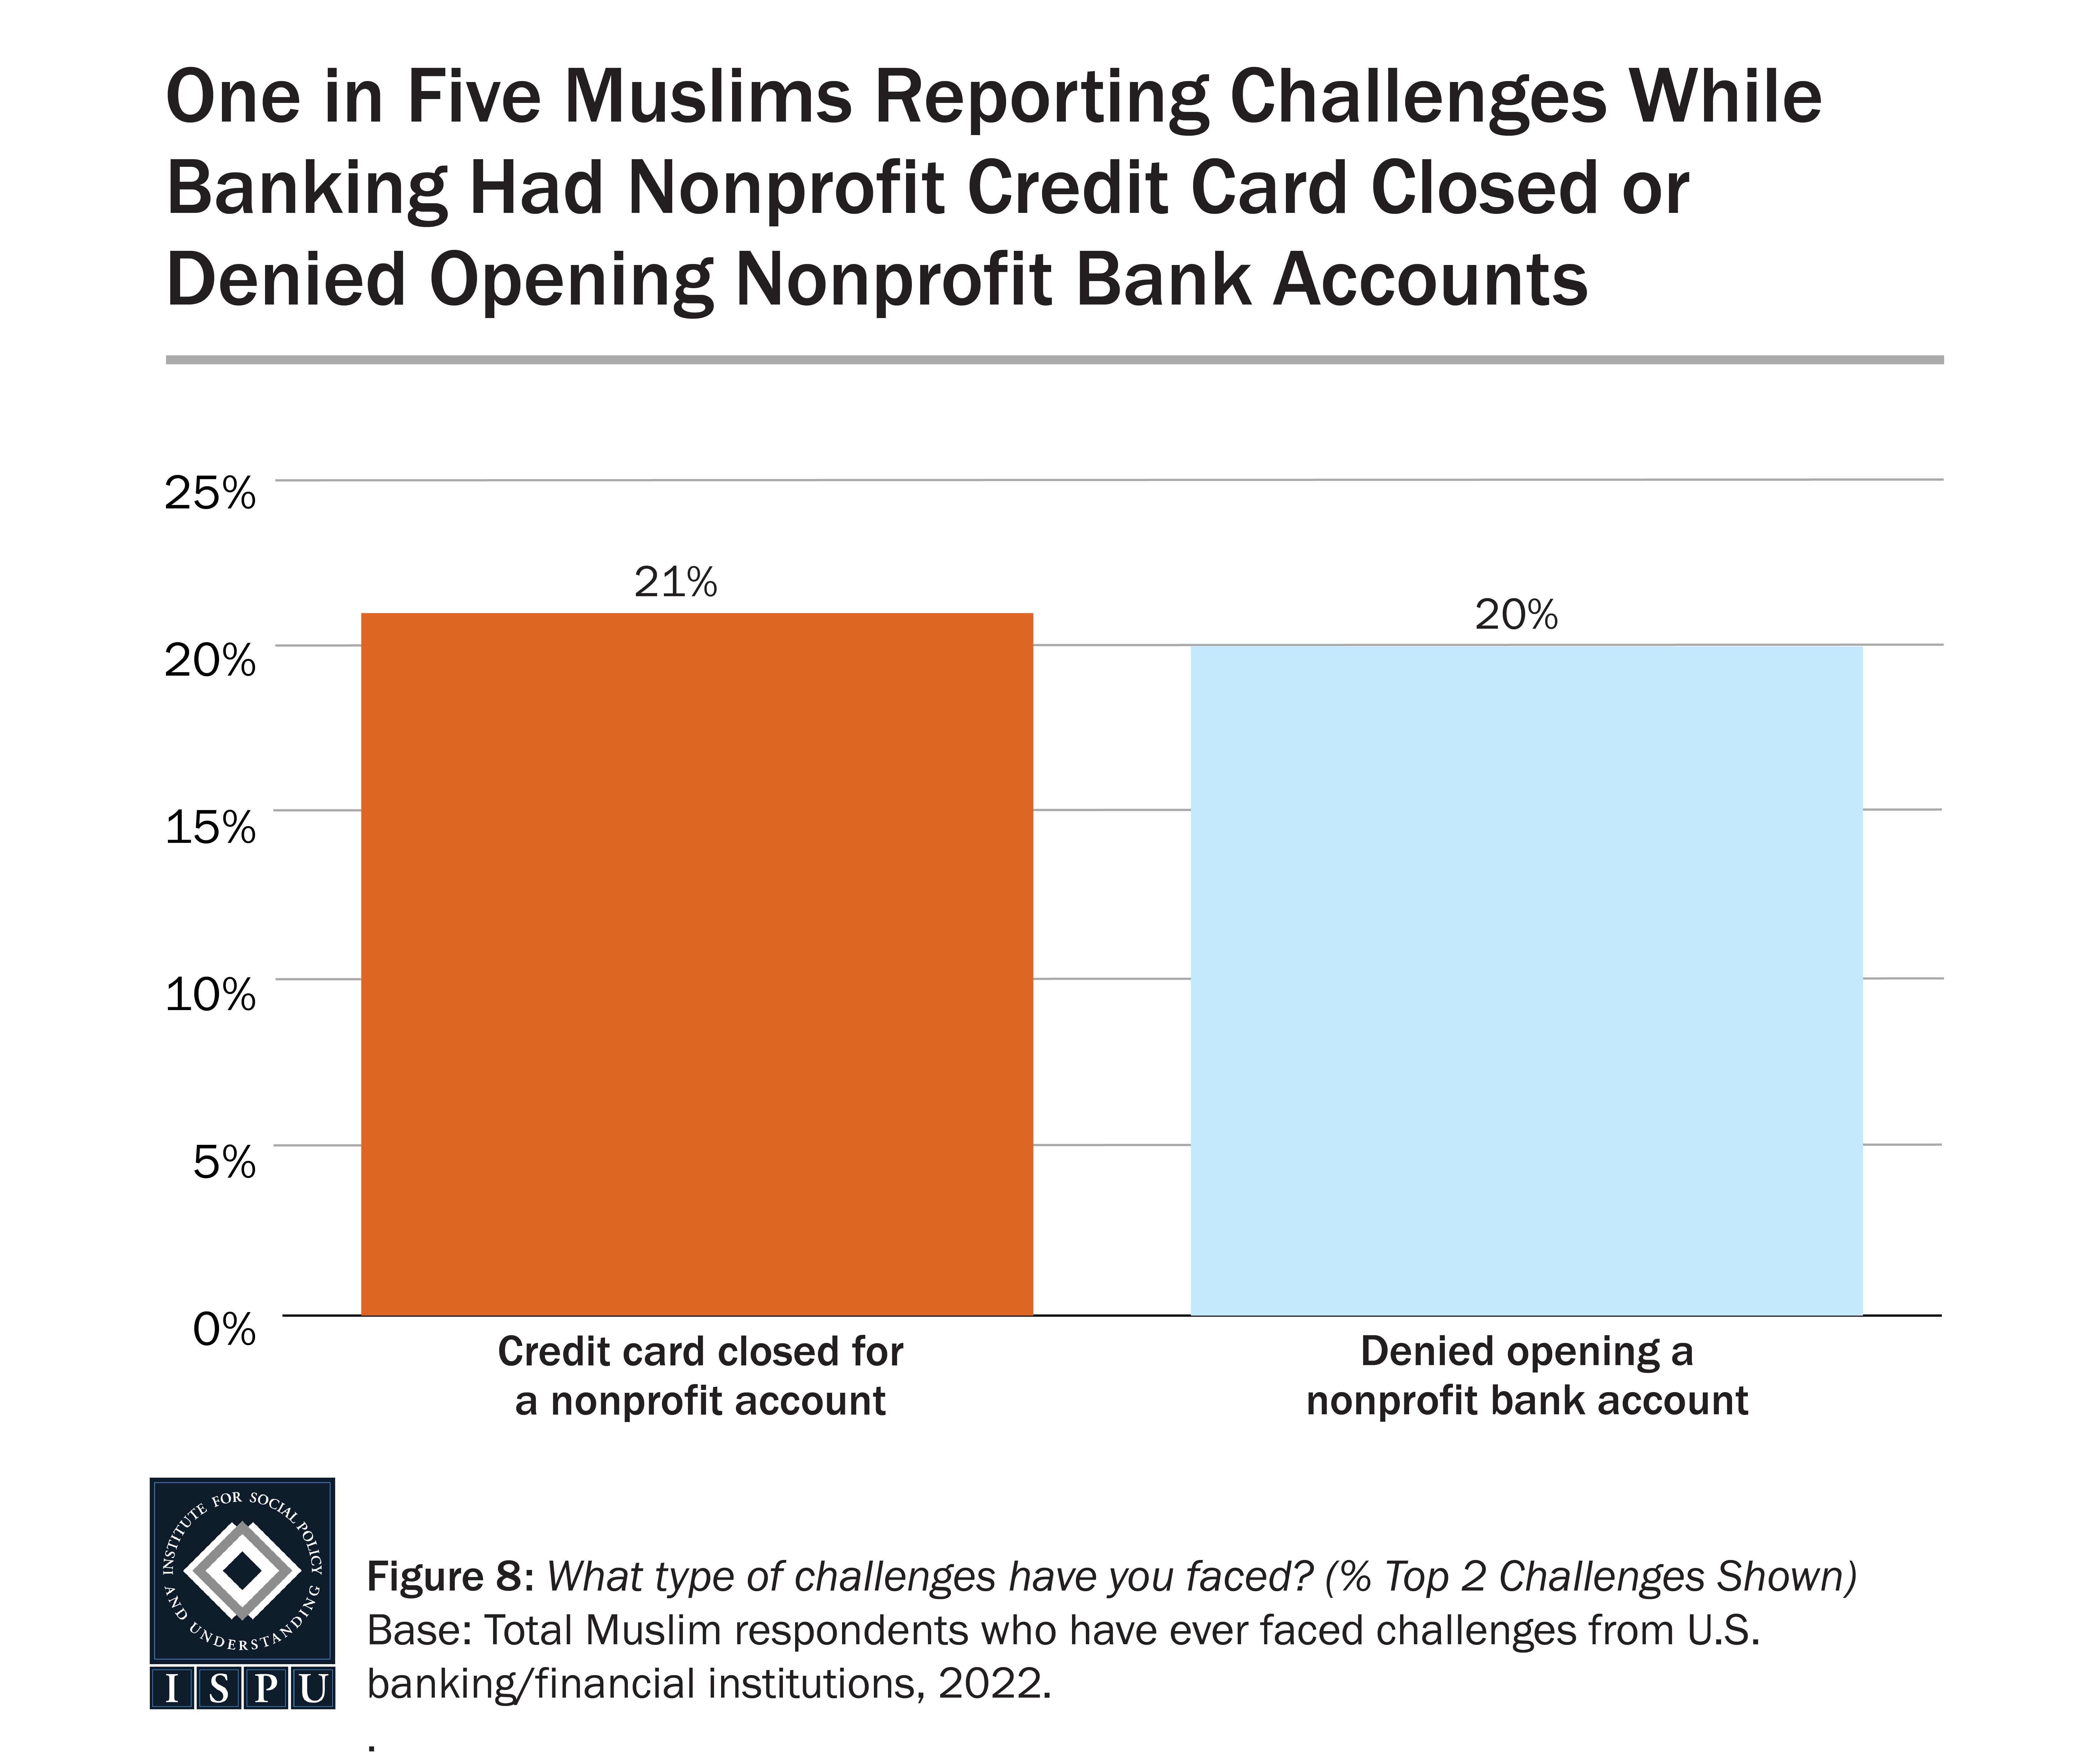 A bar graph showing the types of challenges faced with nonprofit accounts among Muslims who reported facing challenges while banking.